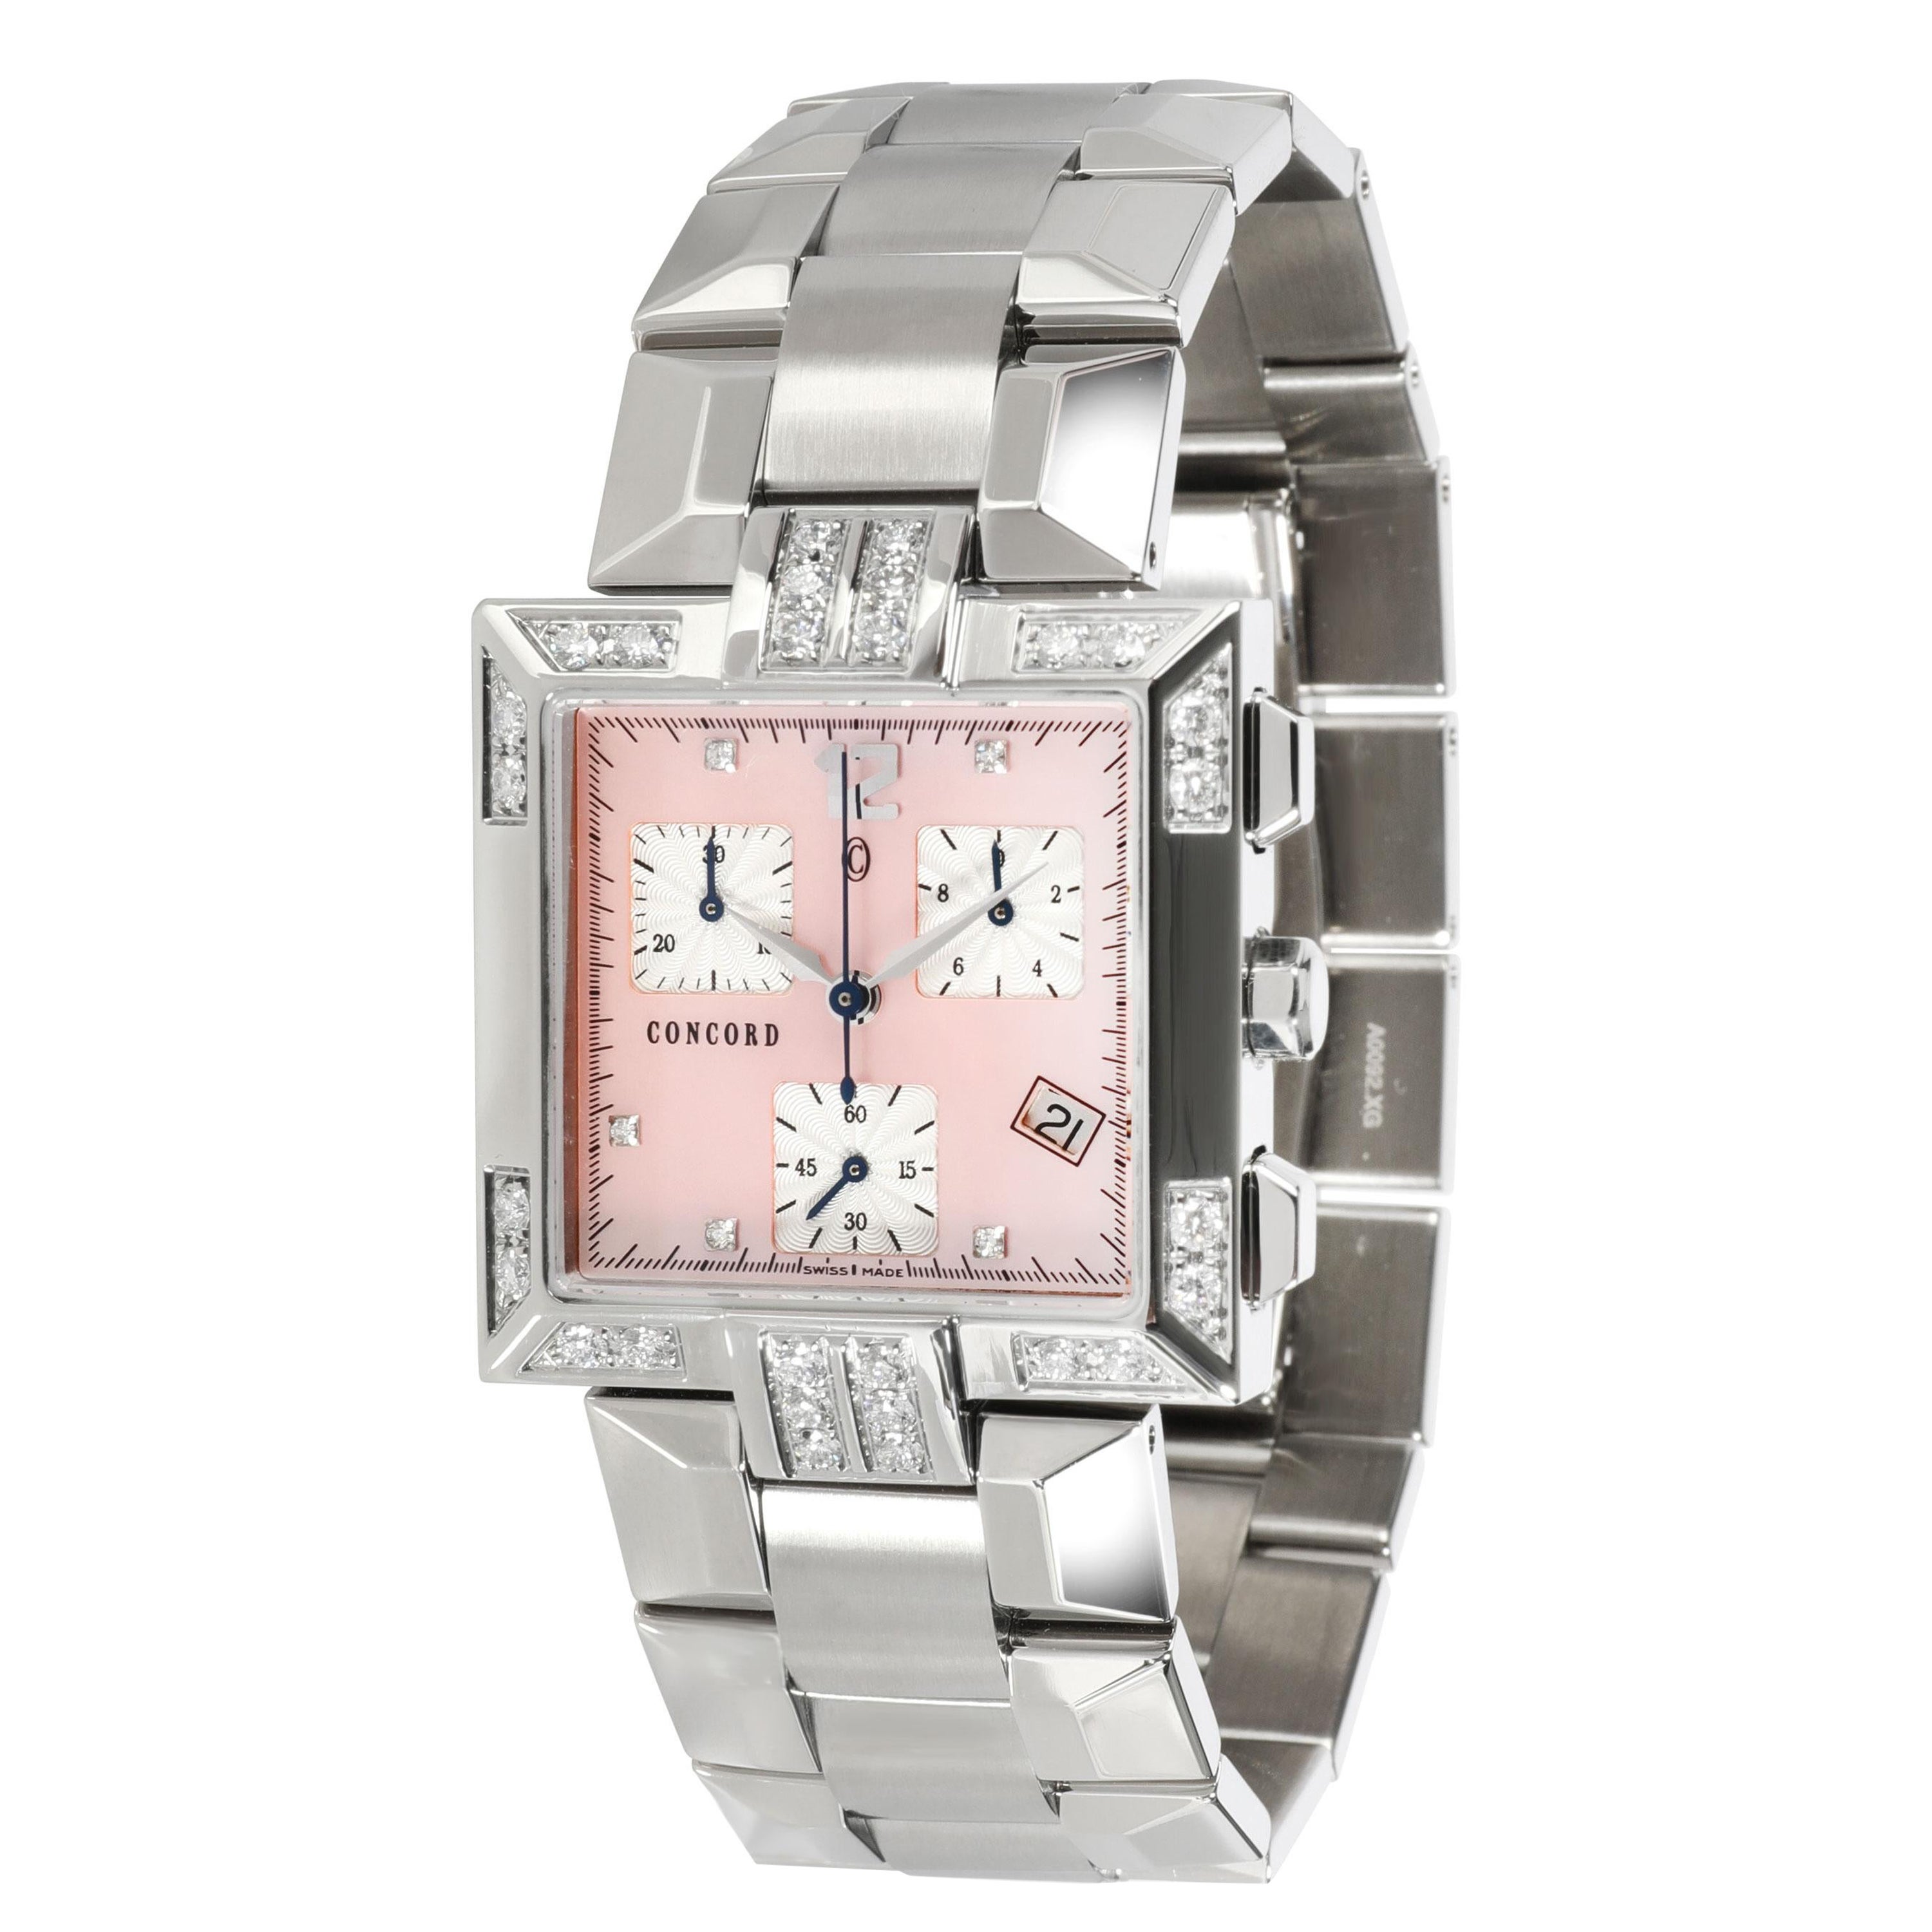 Concord La Scala 14.H1.1371S Women's Watch in Stainless Steel